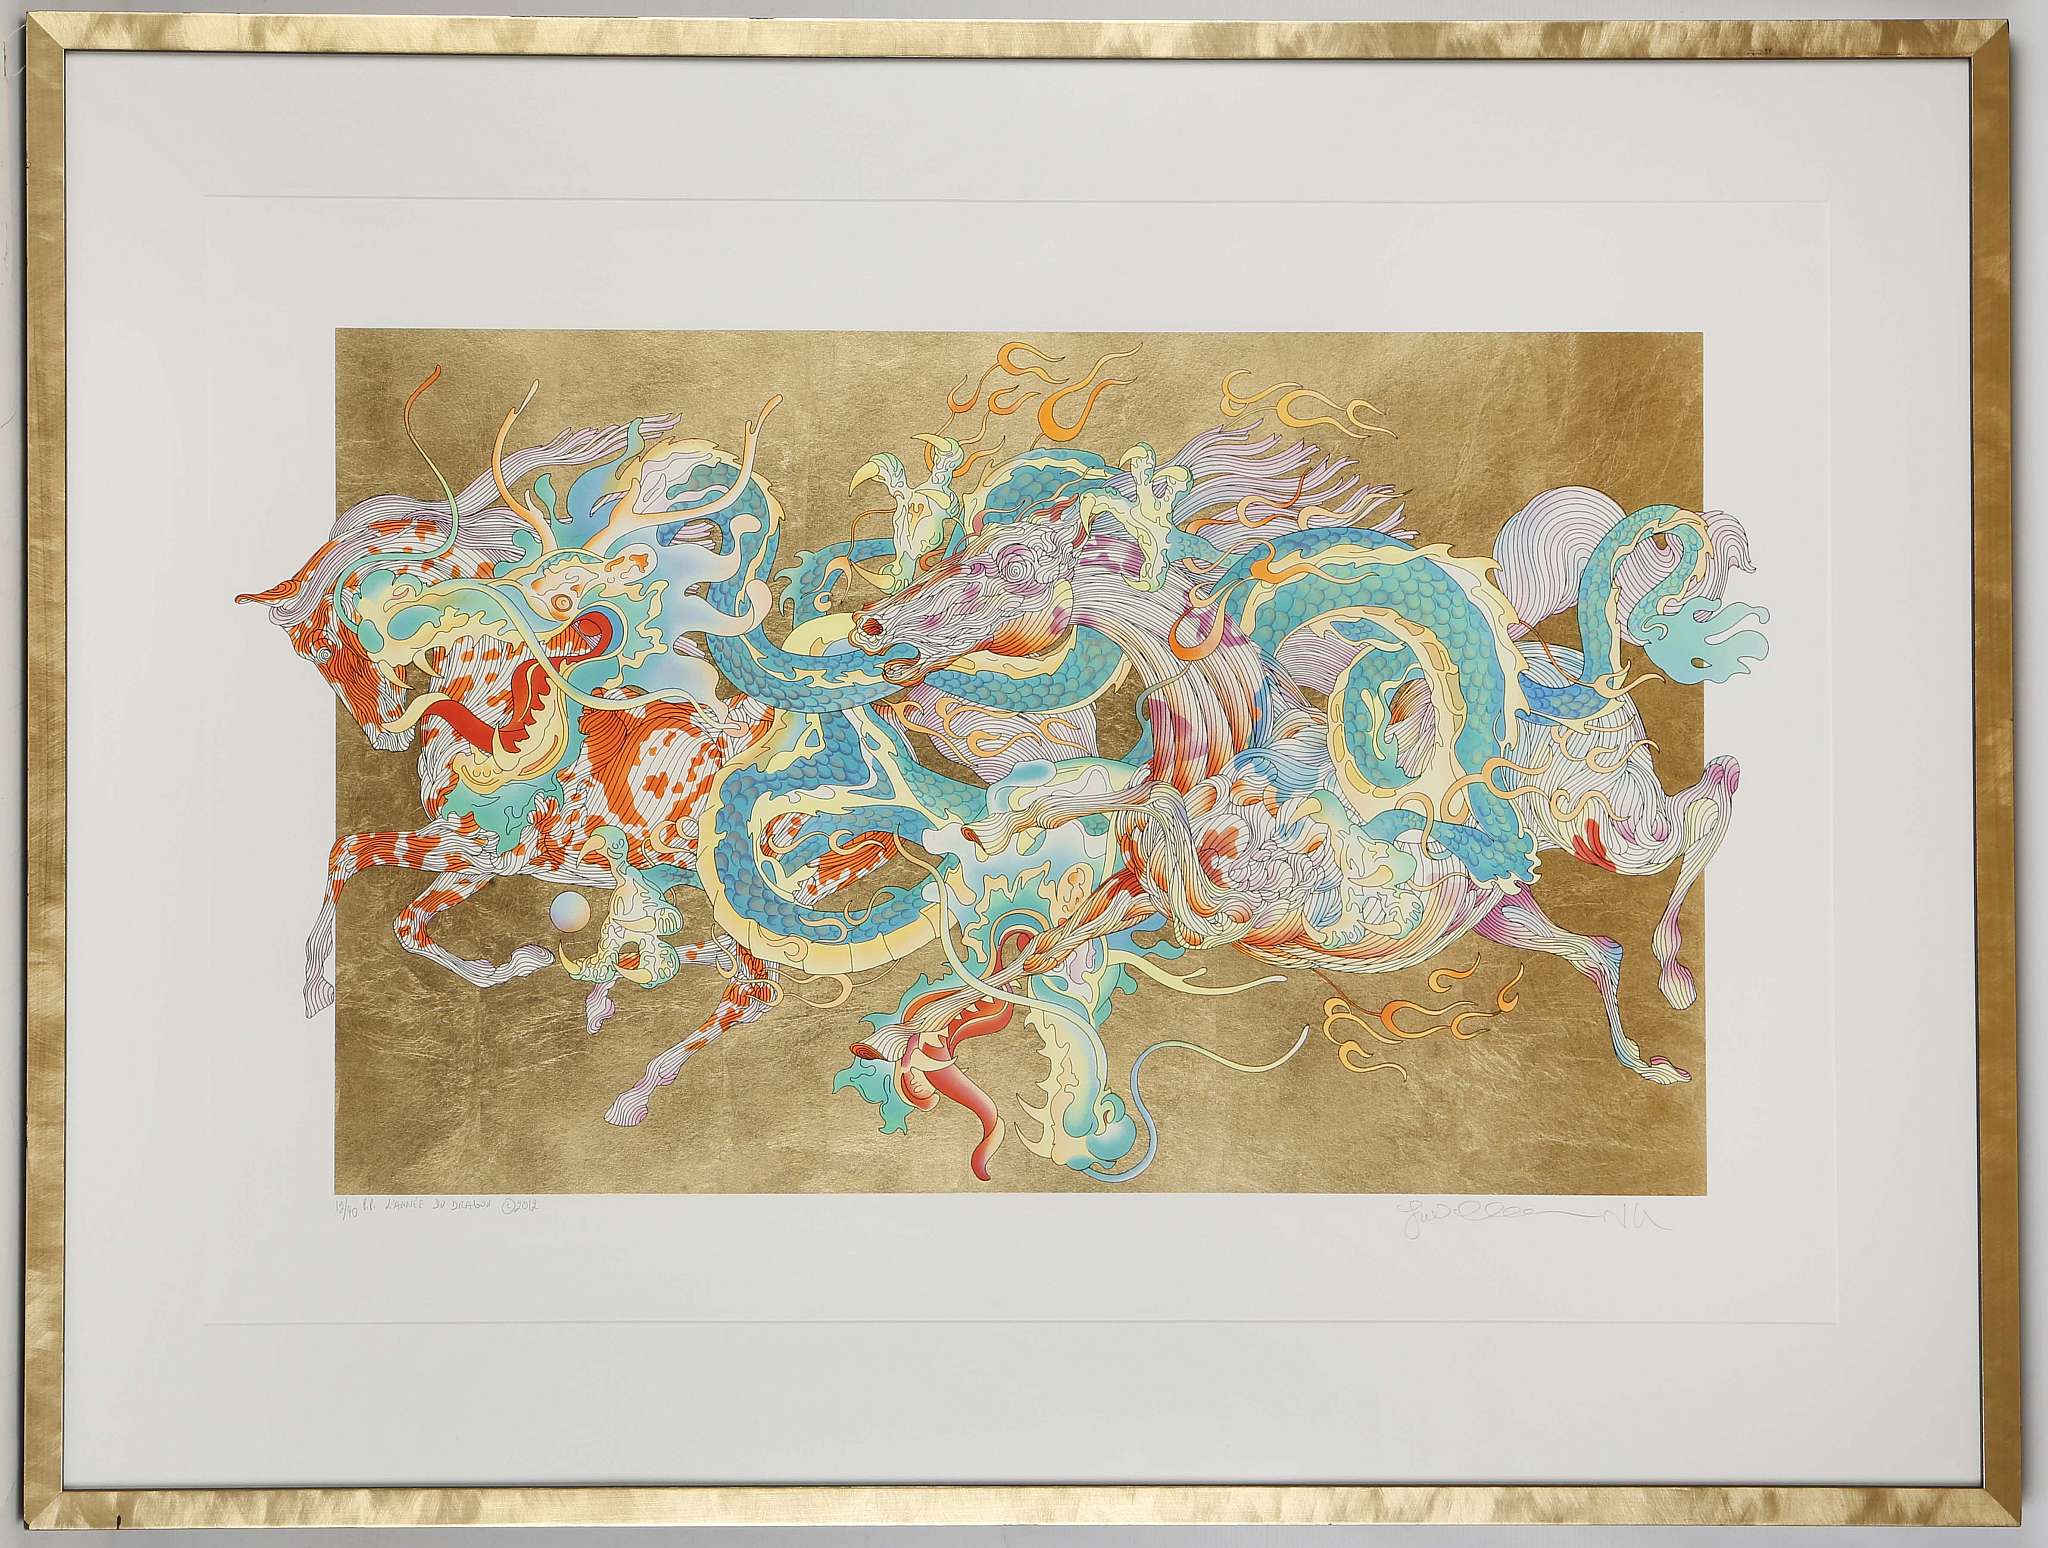 GUILLAUME AZOULAY (MOROCCAN, b.1949), 'L'ANNE DU DRAGON', 2012, serigraph with hand laid gold